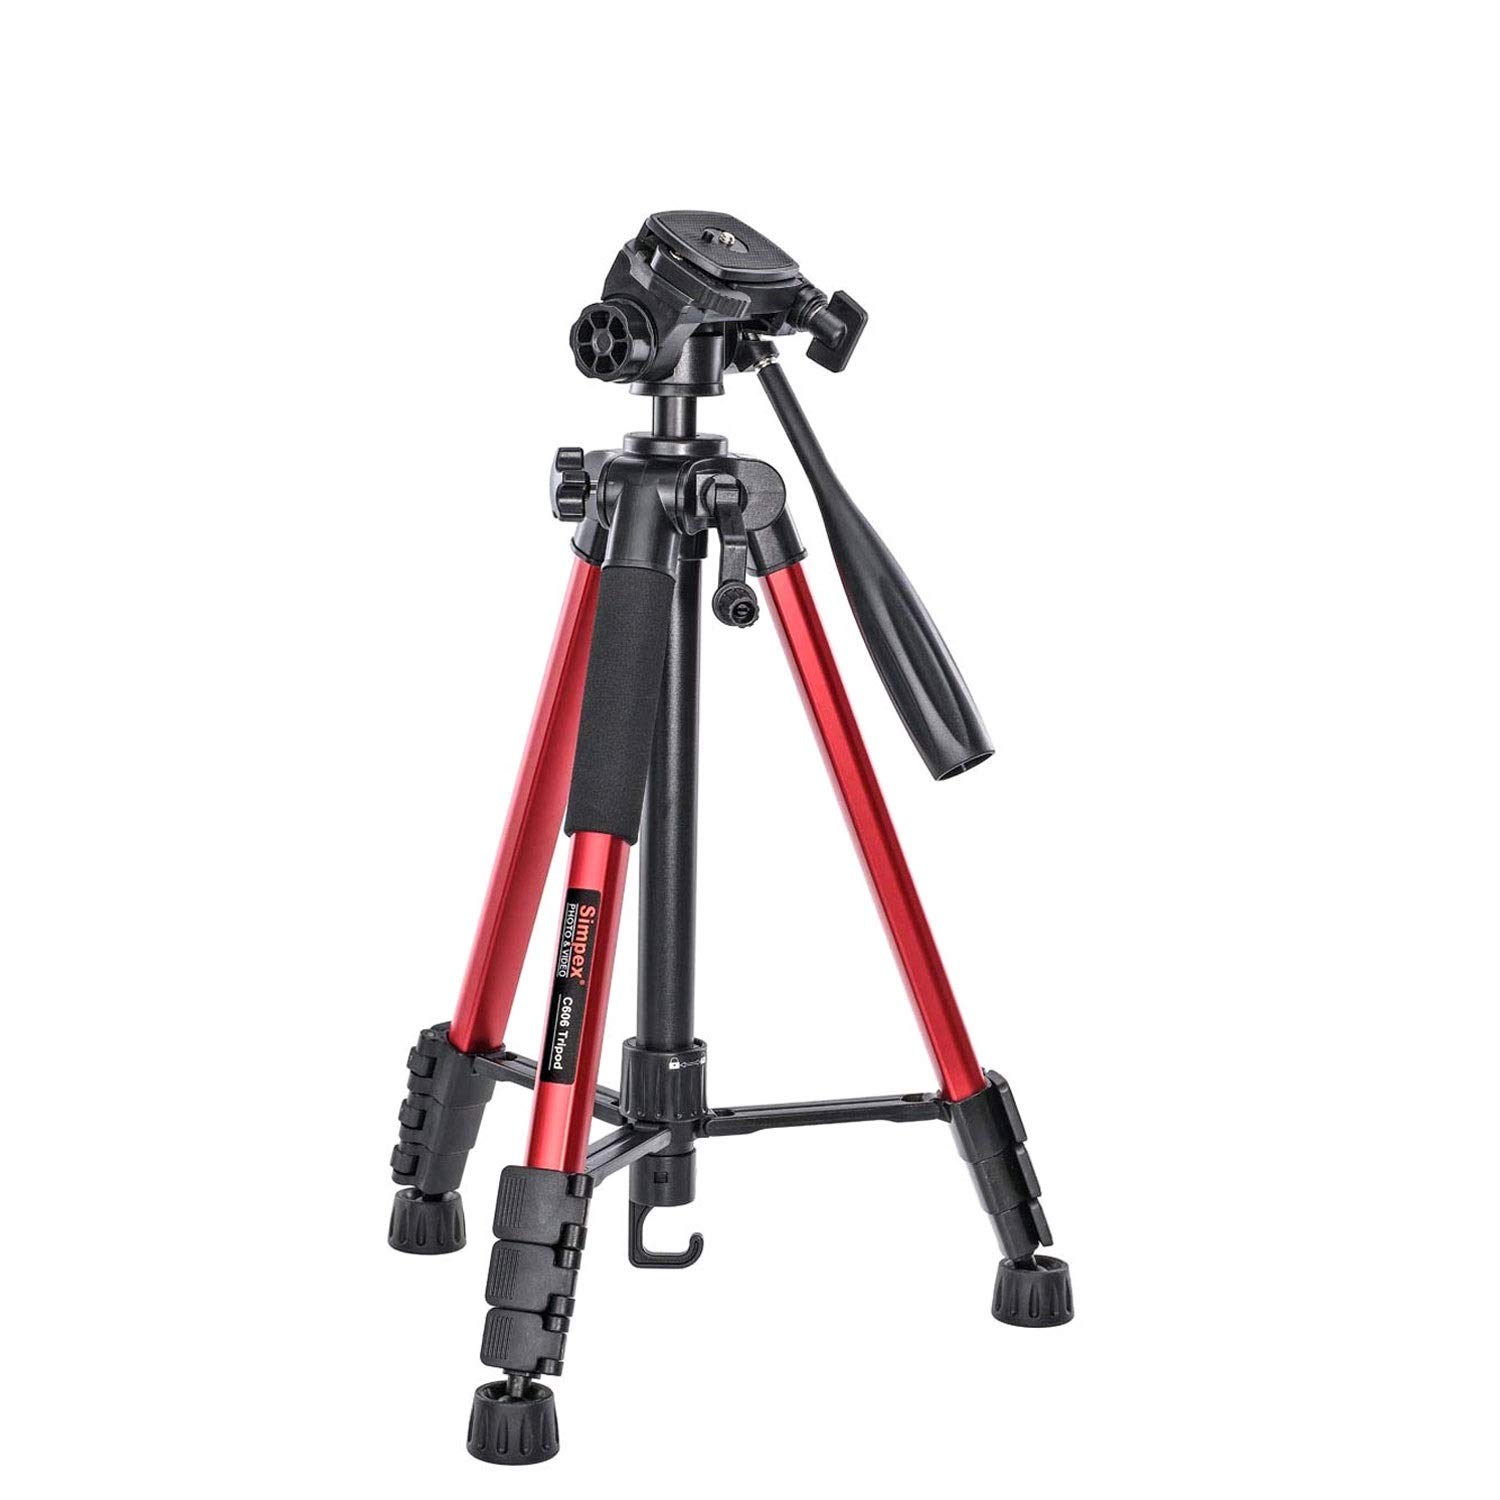 Simpex C-606 Red Tripod - Stylish And Functional Photography Equipment For Professionals.